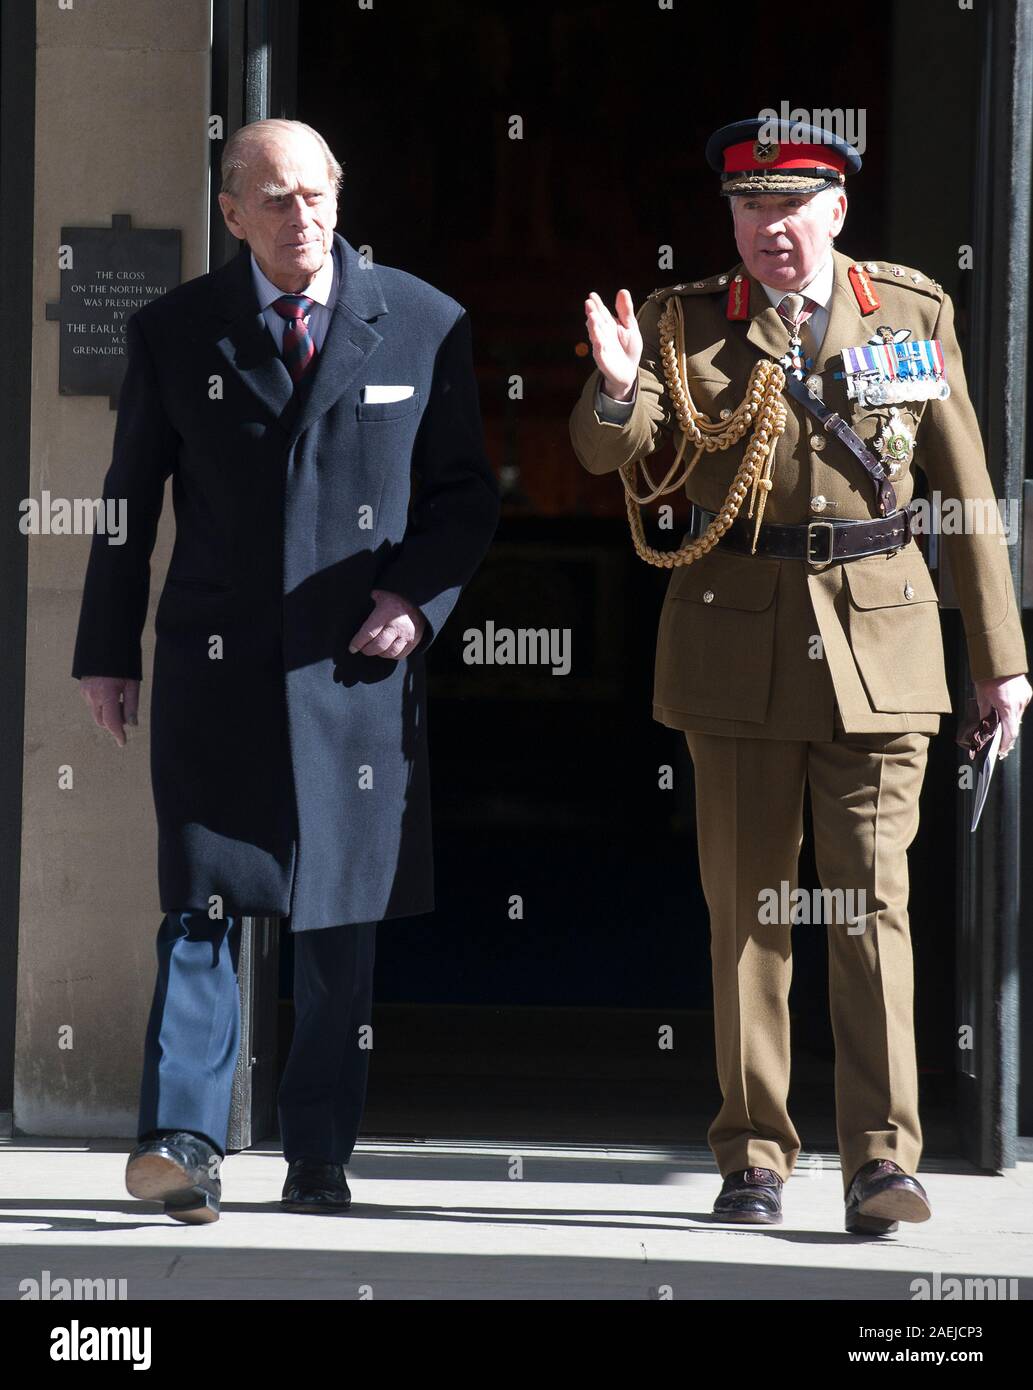 The Duke of Edinburgh with General Lord Dannatt attending a service for the 175th anniversary of the Soldier's and Airmen's scripture Association at the Guards Chapel in London. Stock Photo